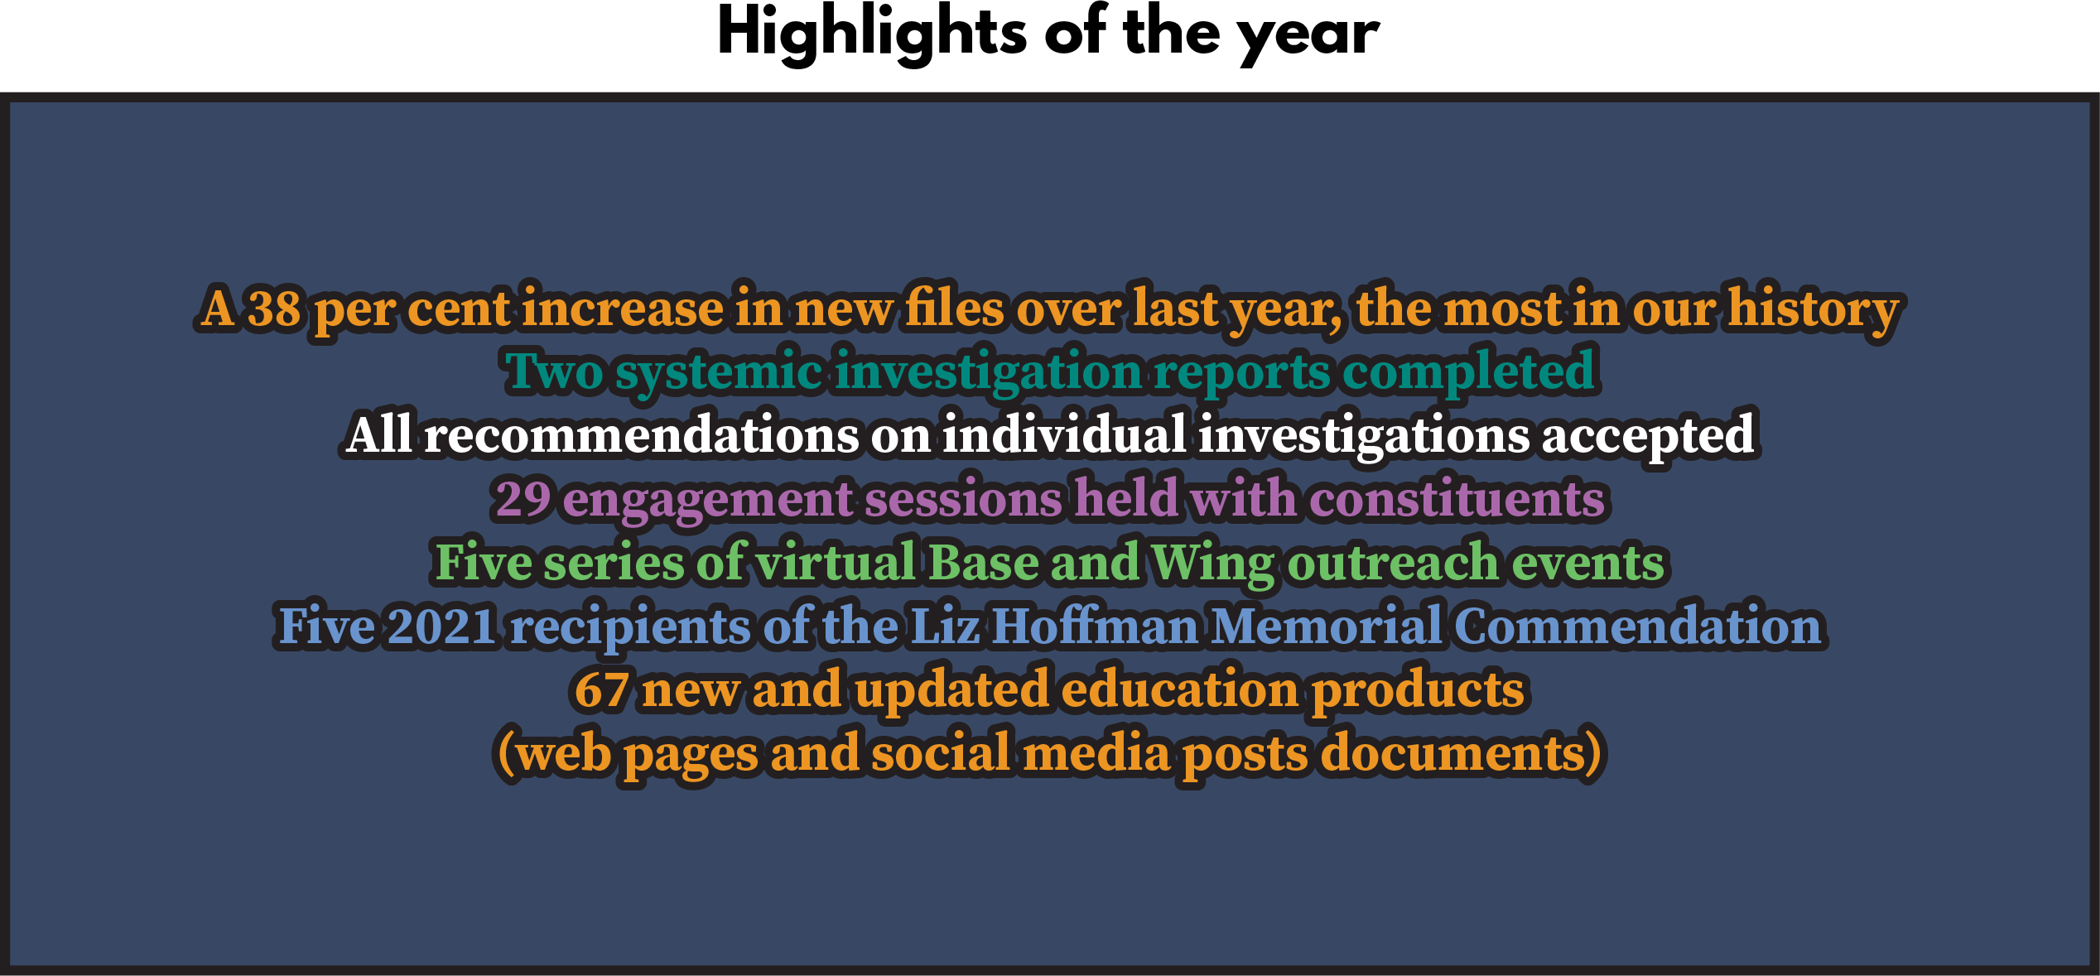 Highlights of the year